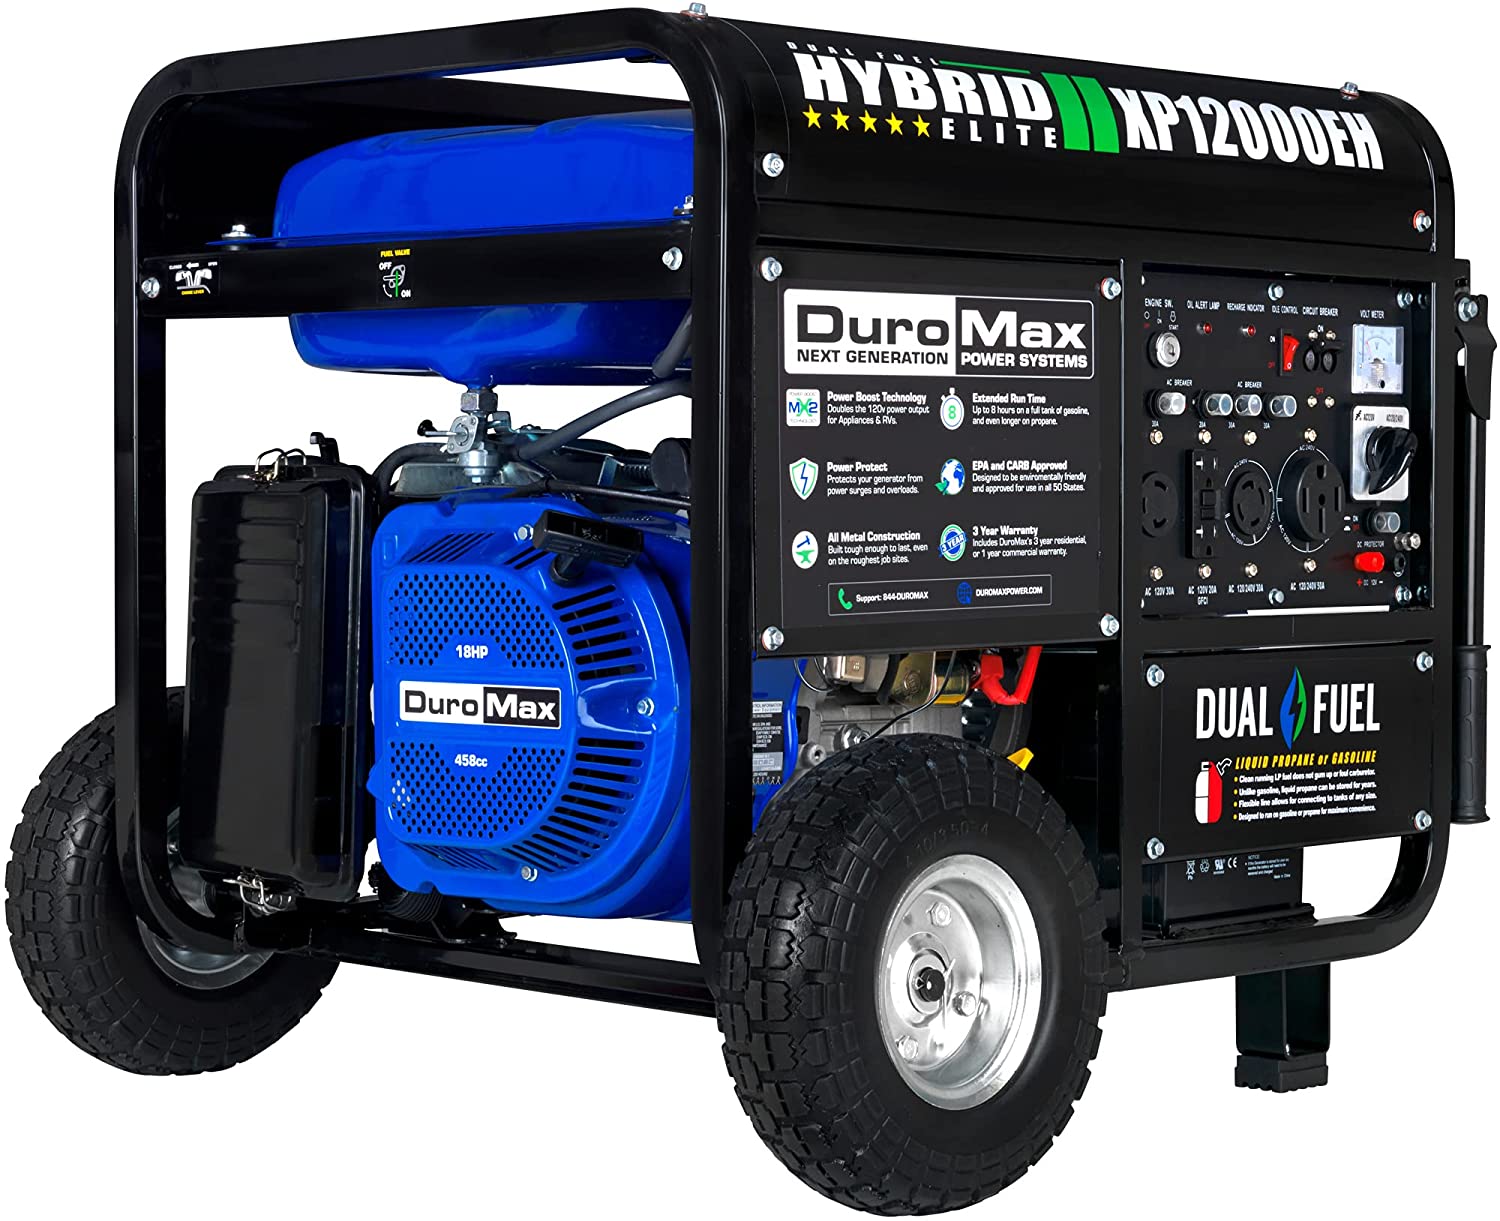 DuroMax XP12000EH Portable Generator Review